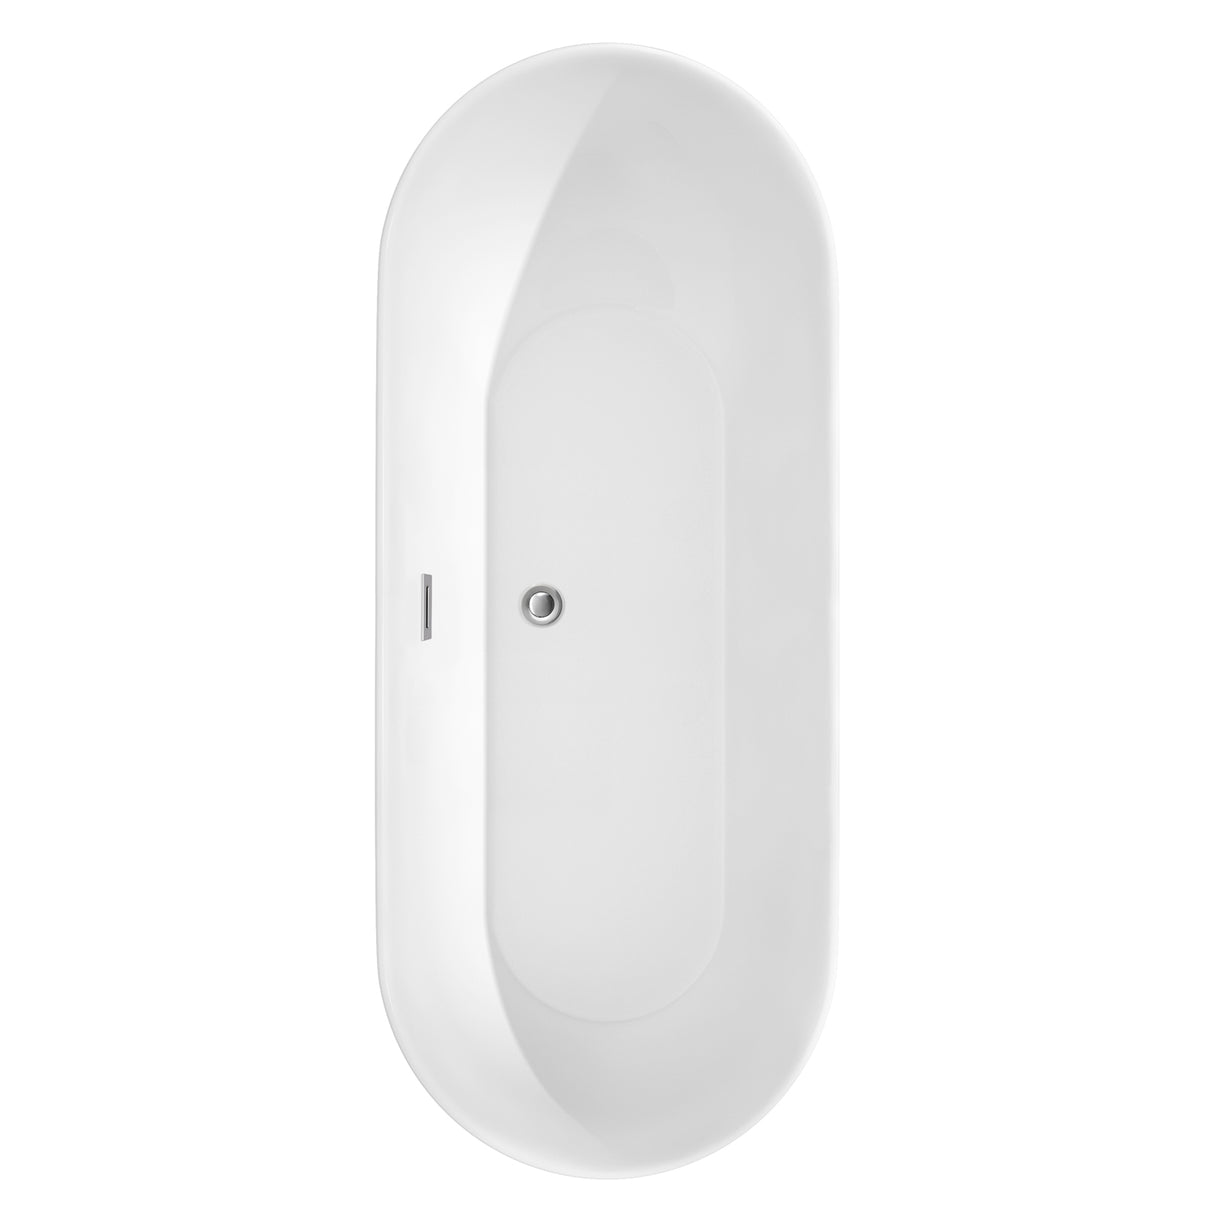 Melissa 71 Inch Freestanding Bathtub in White with Polished Chrome Drain and Overflow Trim